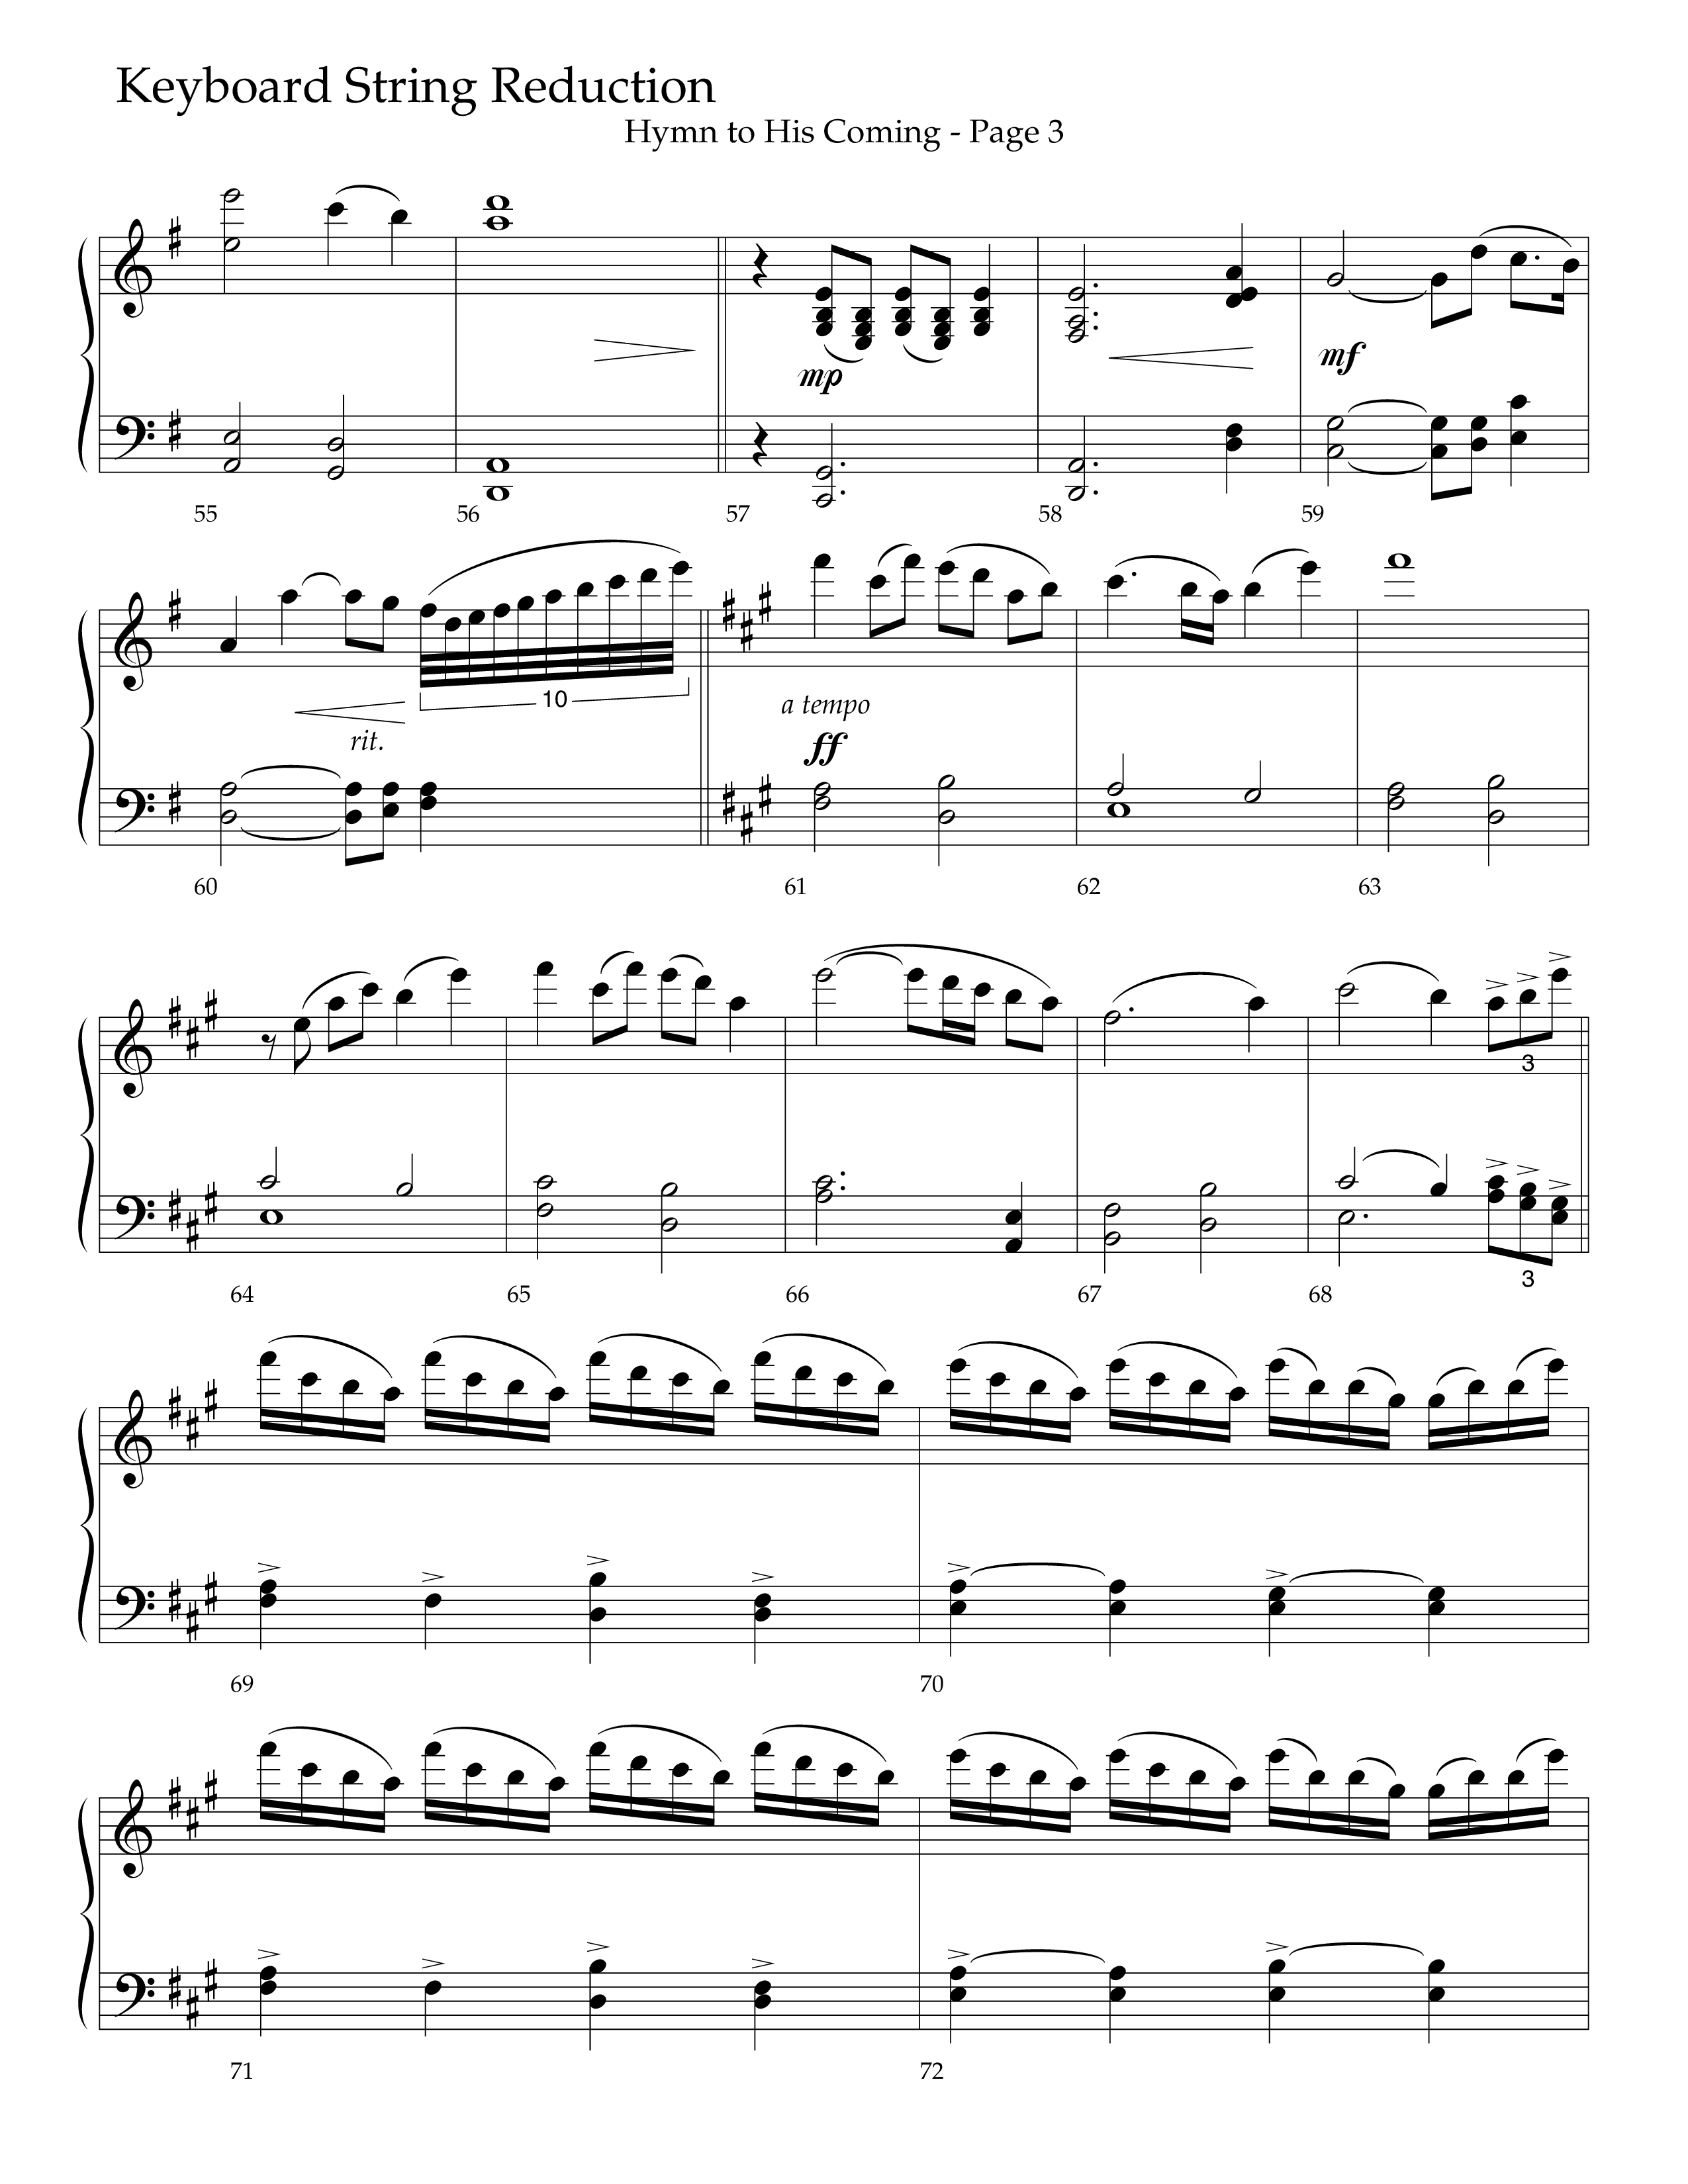 Hymn To His Coming (Choral Anthem SATB) String Reduction (Lifeway Choral / Arr. Russell Mauldin)